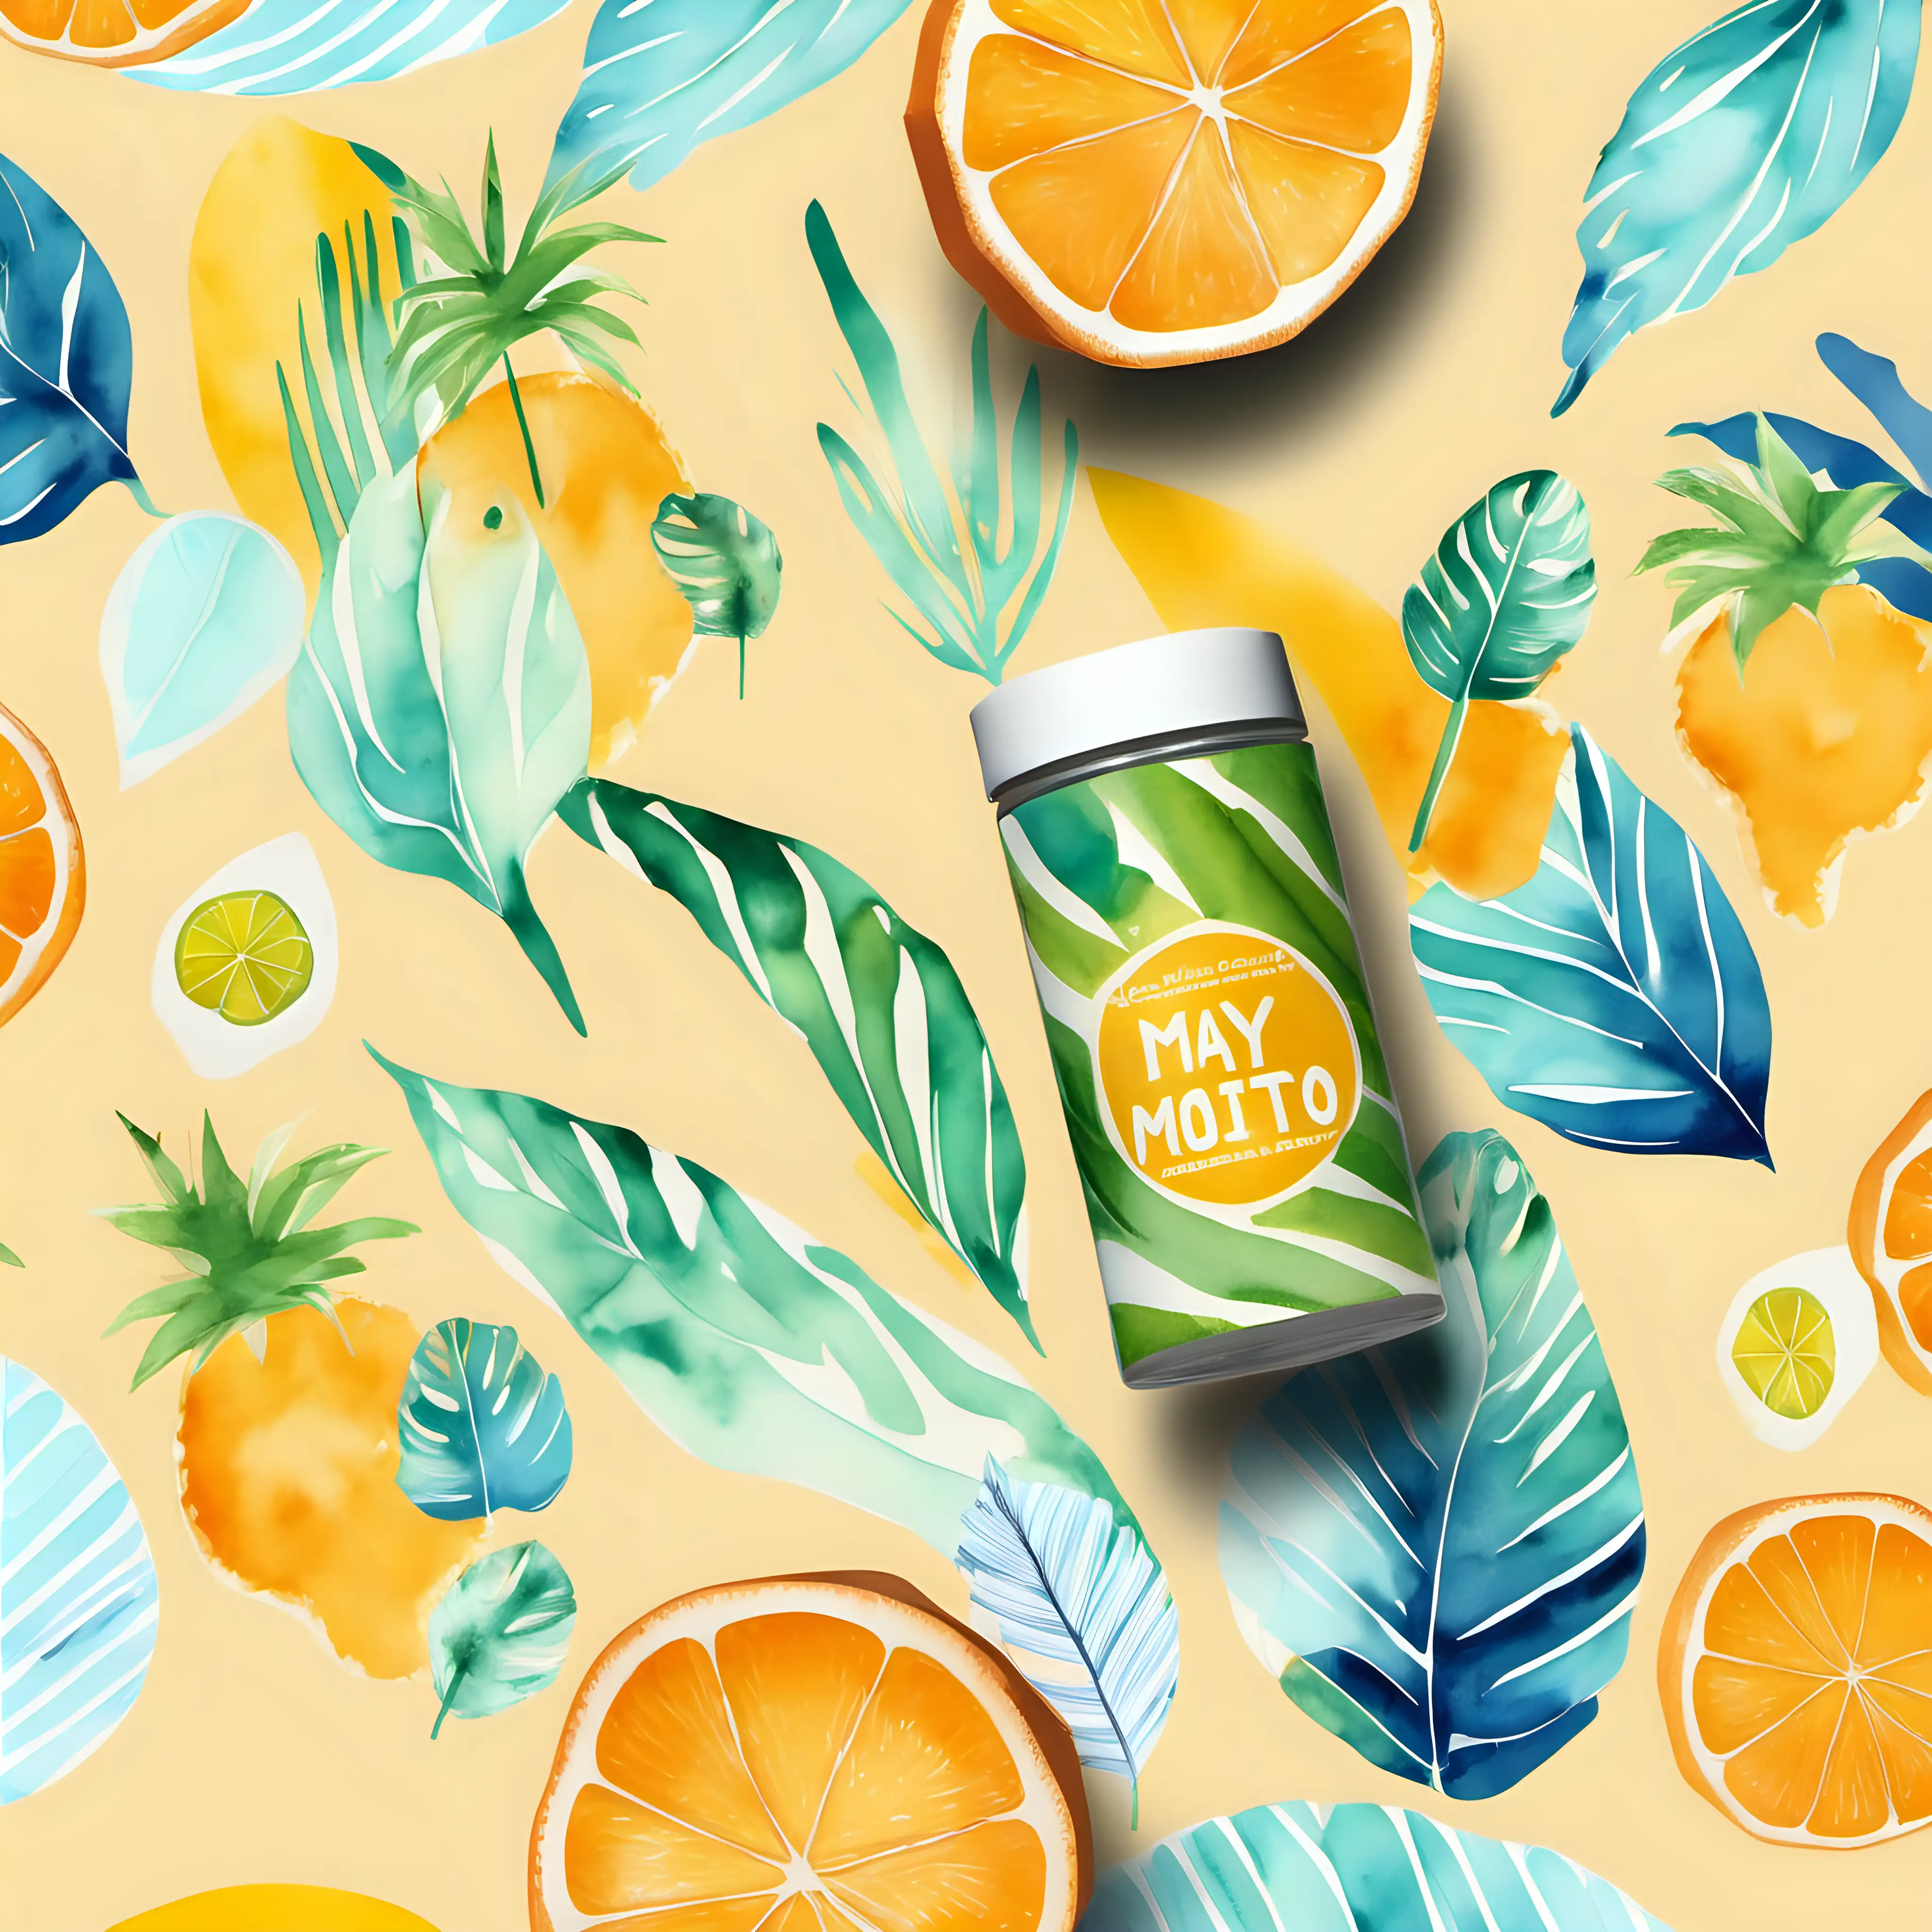 Graphic design for the May box. Abstract print backgrounds or illustrations expressing euphoric summer vibes and the tan glaze aesthetic associated with the Beach ready theme. Visually appealing packaging design. You know what they say: girls just wanna have sun, and happiness comes in waves. So, grab a mojito and dive into this summer beauty playground. watercolor background, patern